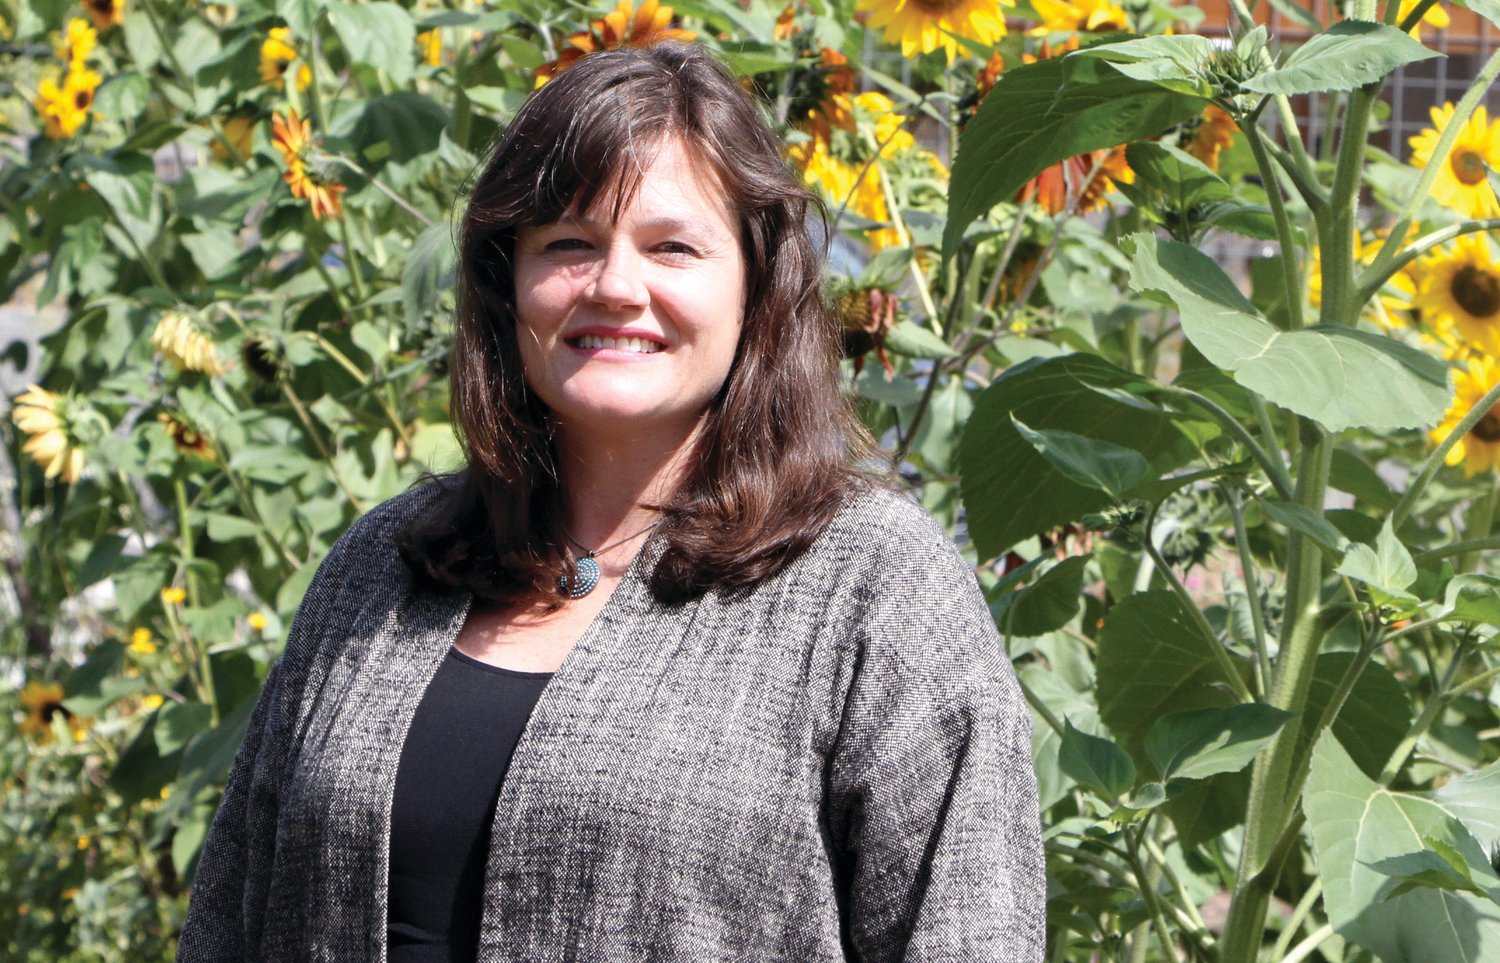 Rosenbury poses in front of the sunflowers at Salish Coast Elementary School’s teaching garden, an integral setting for her place-based learning program.